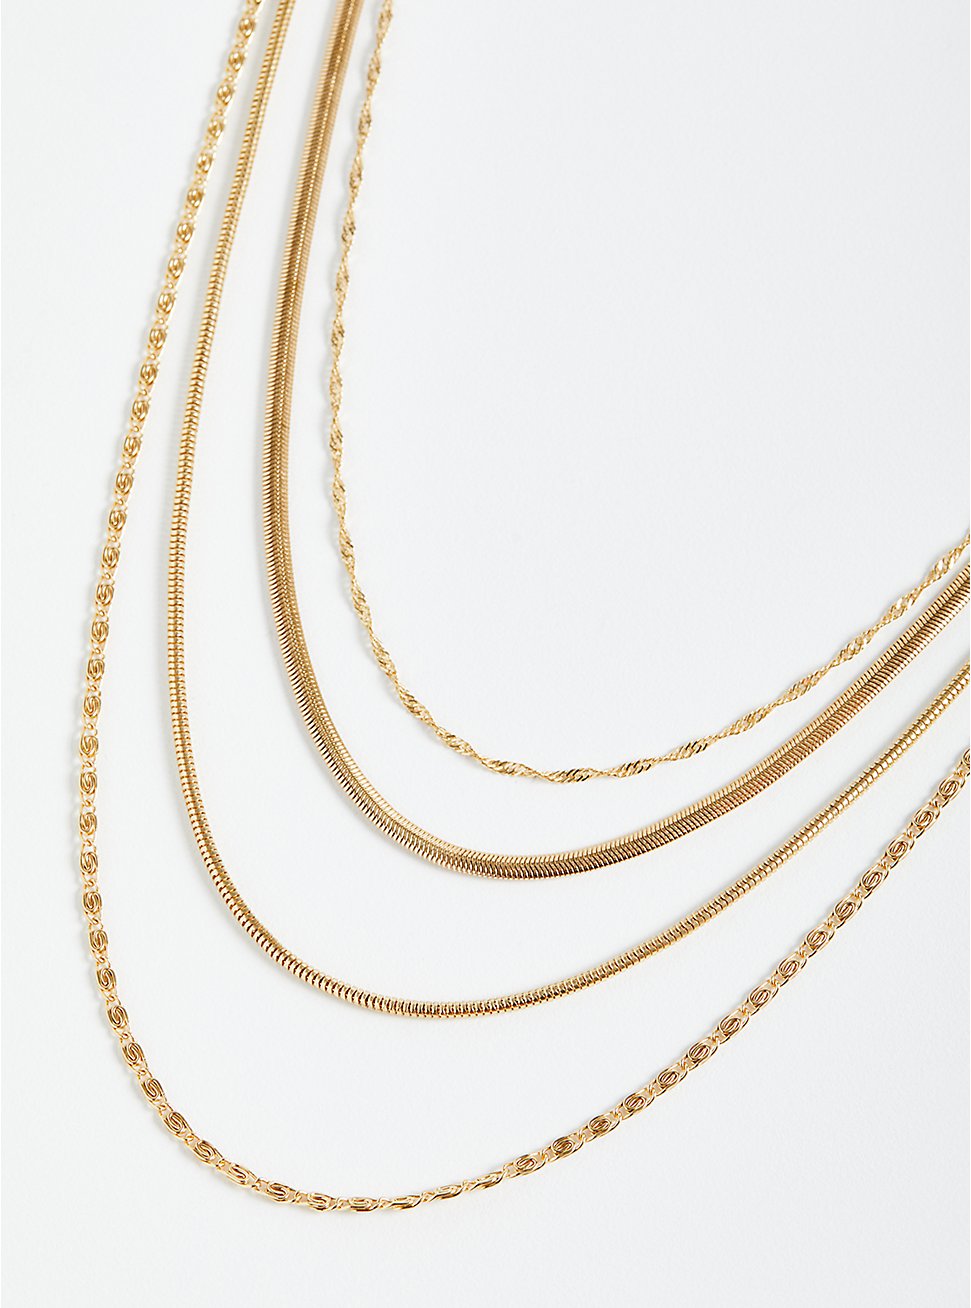 3 Layered Snake Chain Necklace - Gold Tone, , hi-res